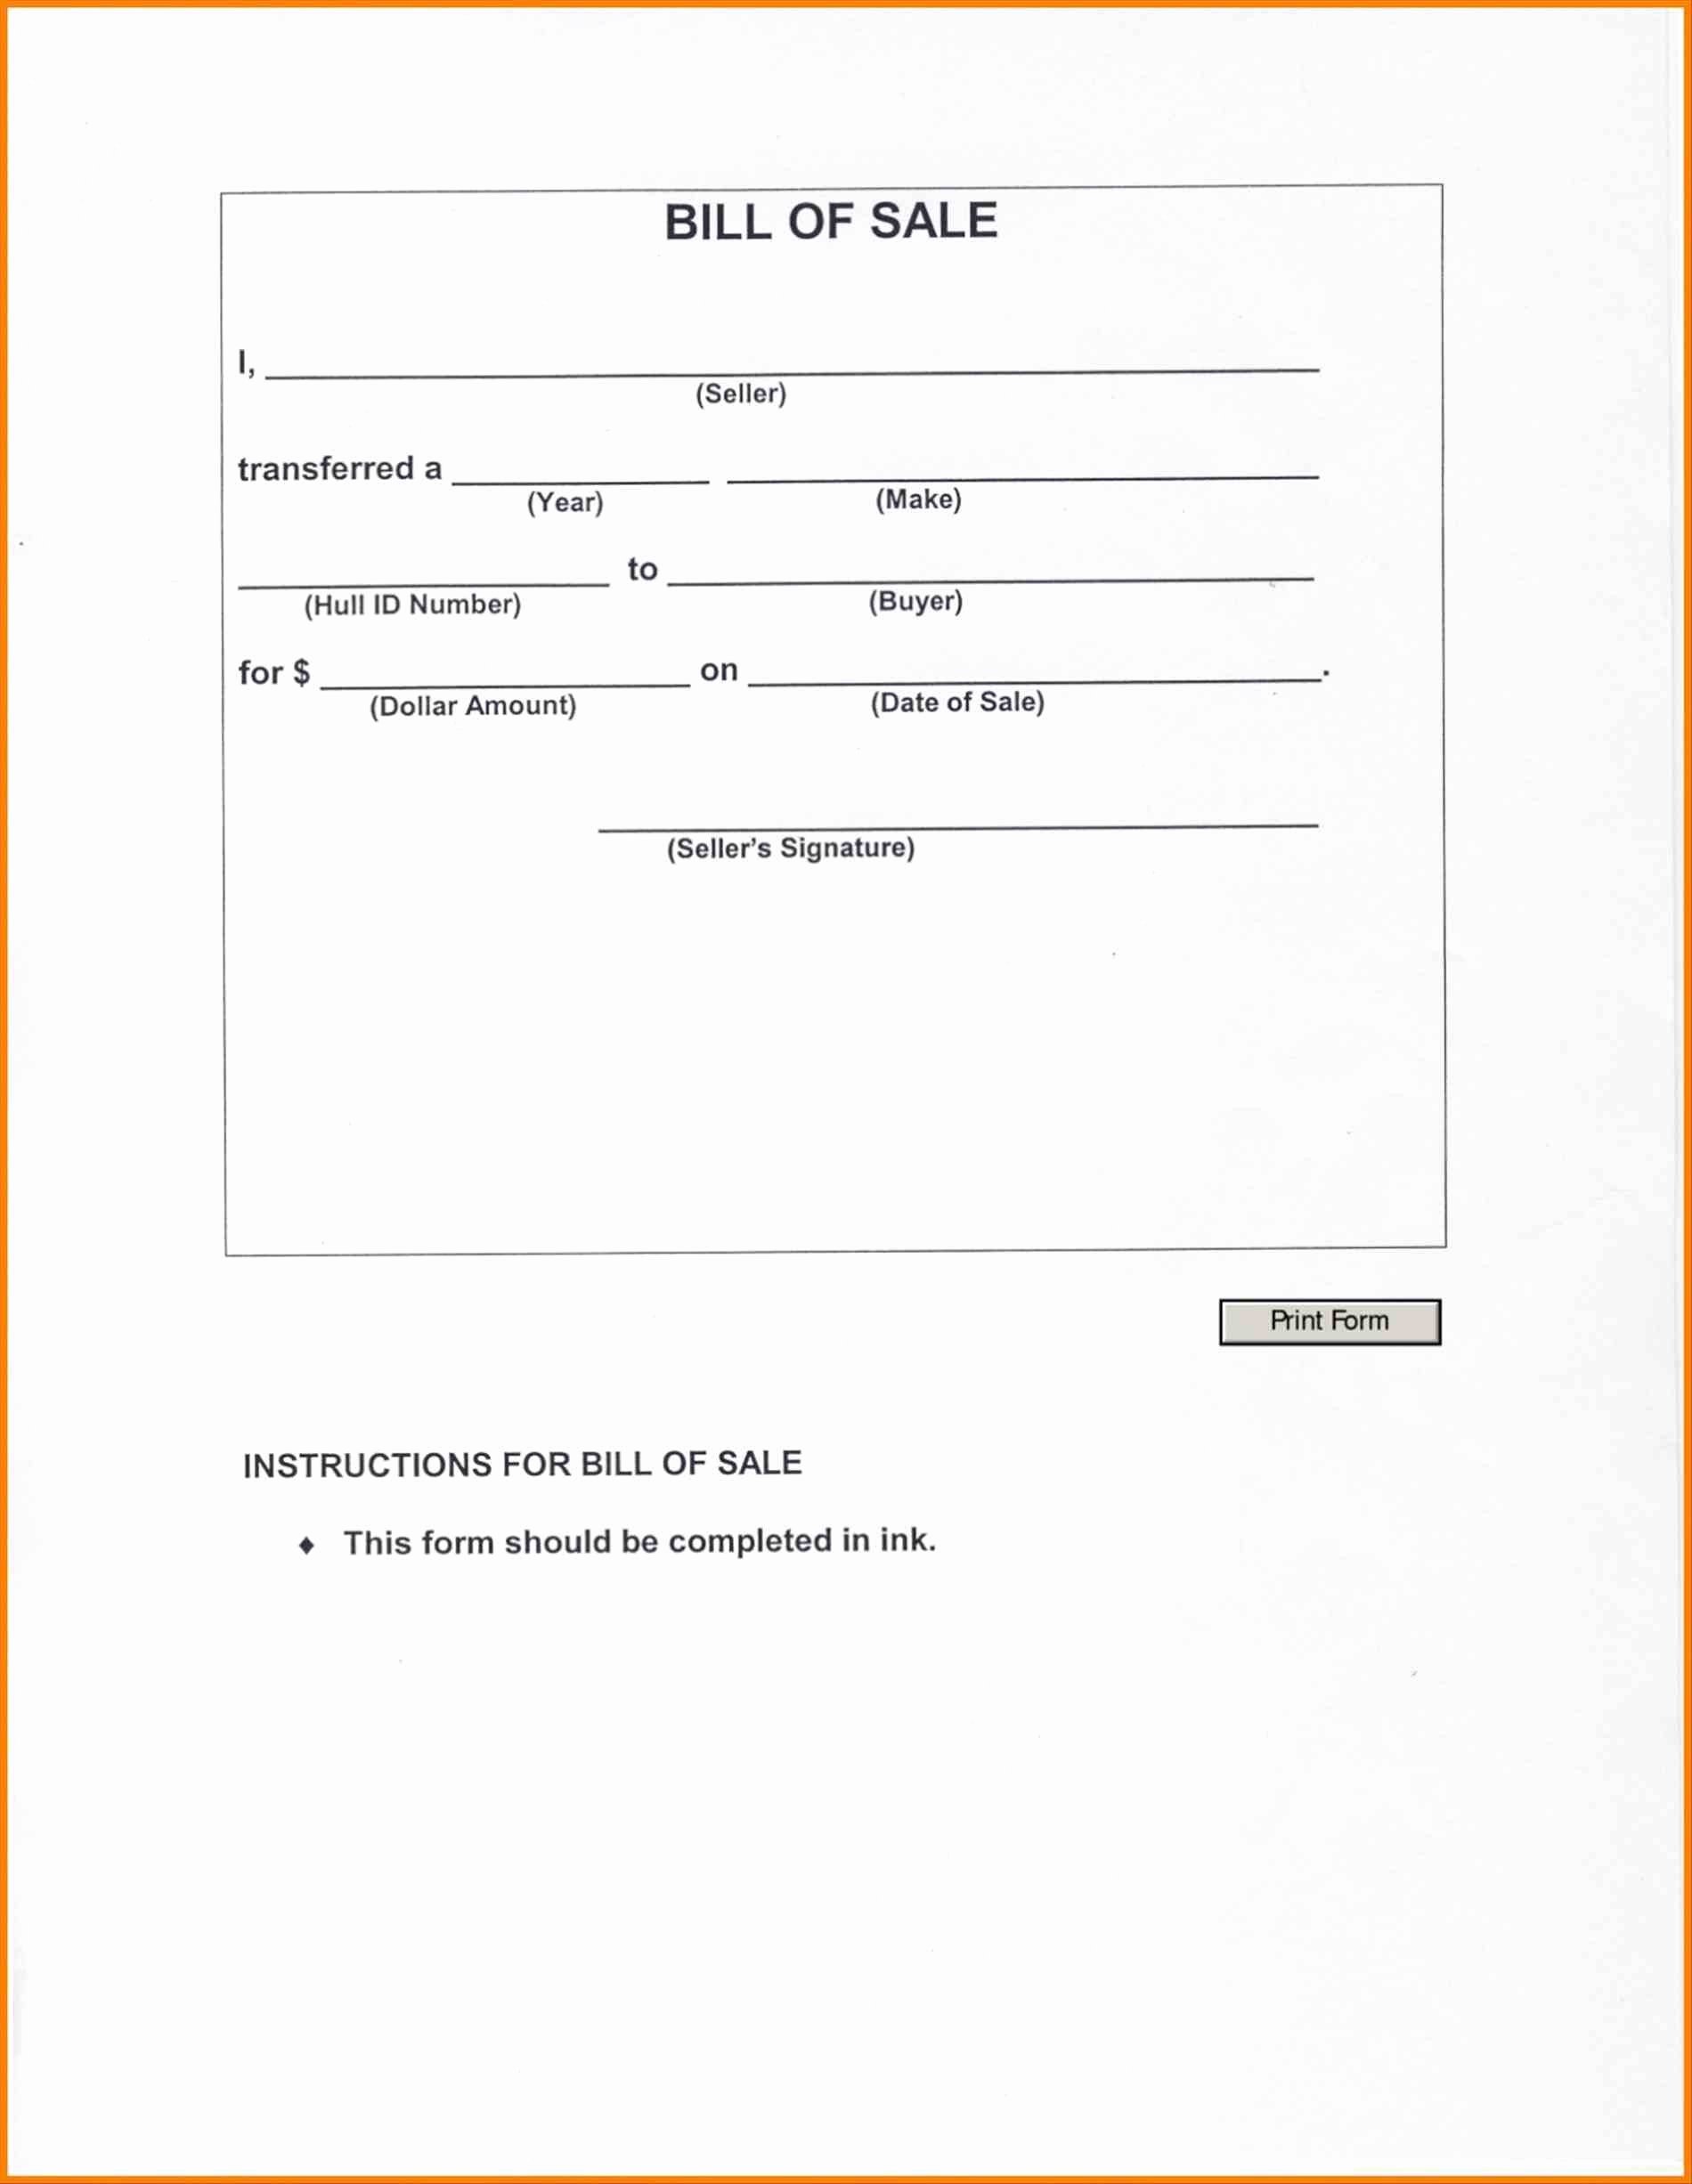 Rv Purchase Agreement Template Luxury Rv Purchase Agreement Pdf Basic Printable Bill Sale